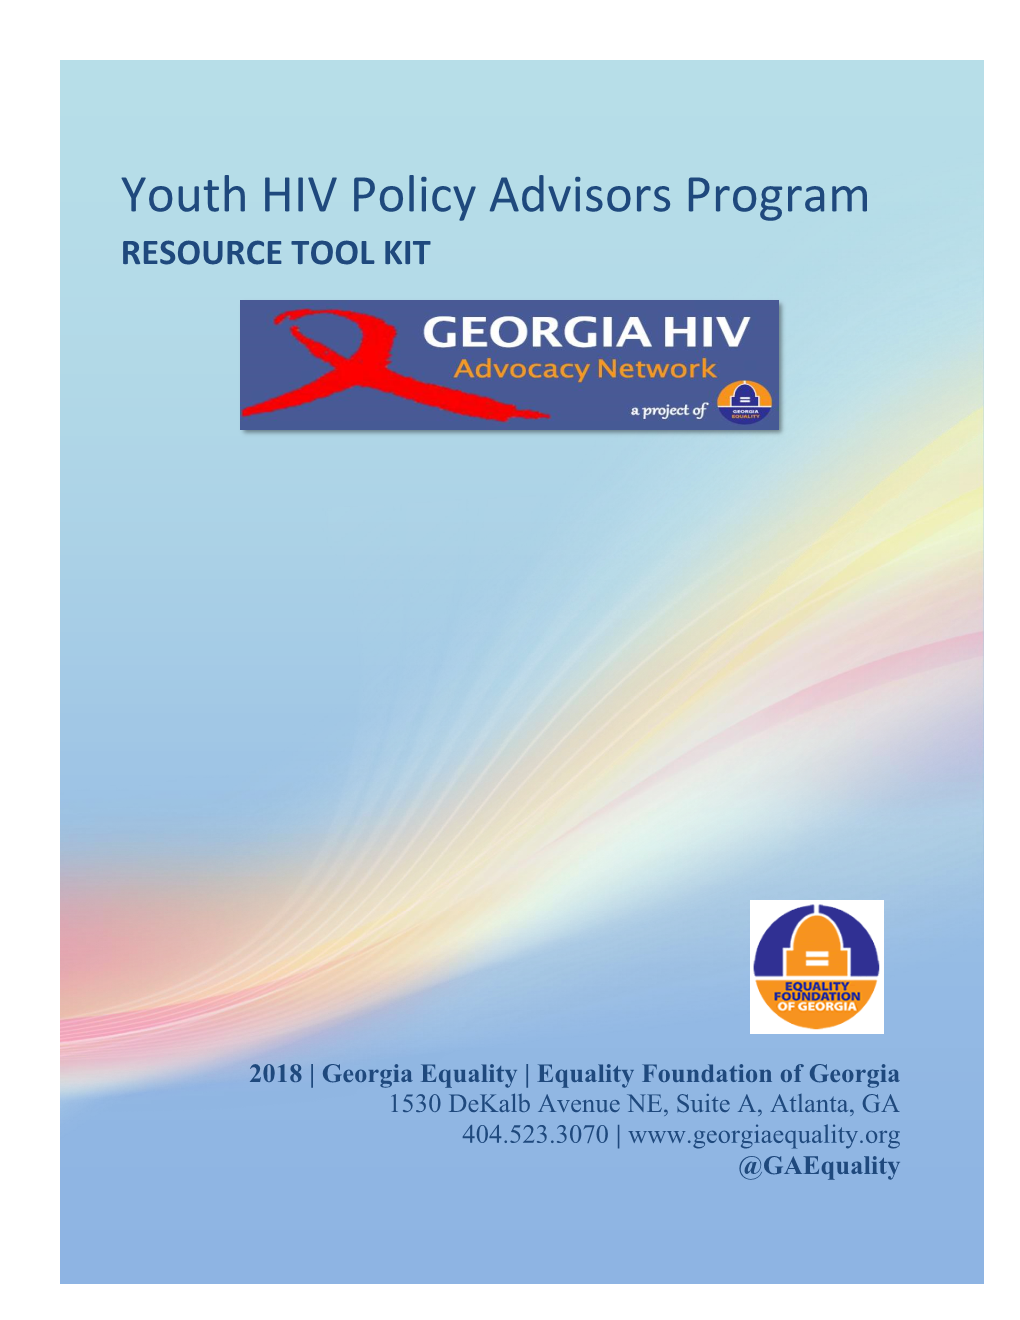 Youth HIV Policy Advisors Resource Toolkit